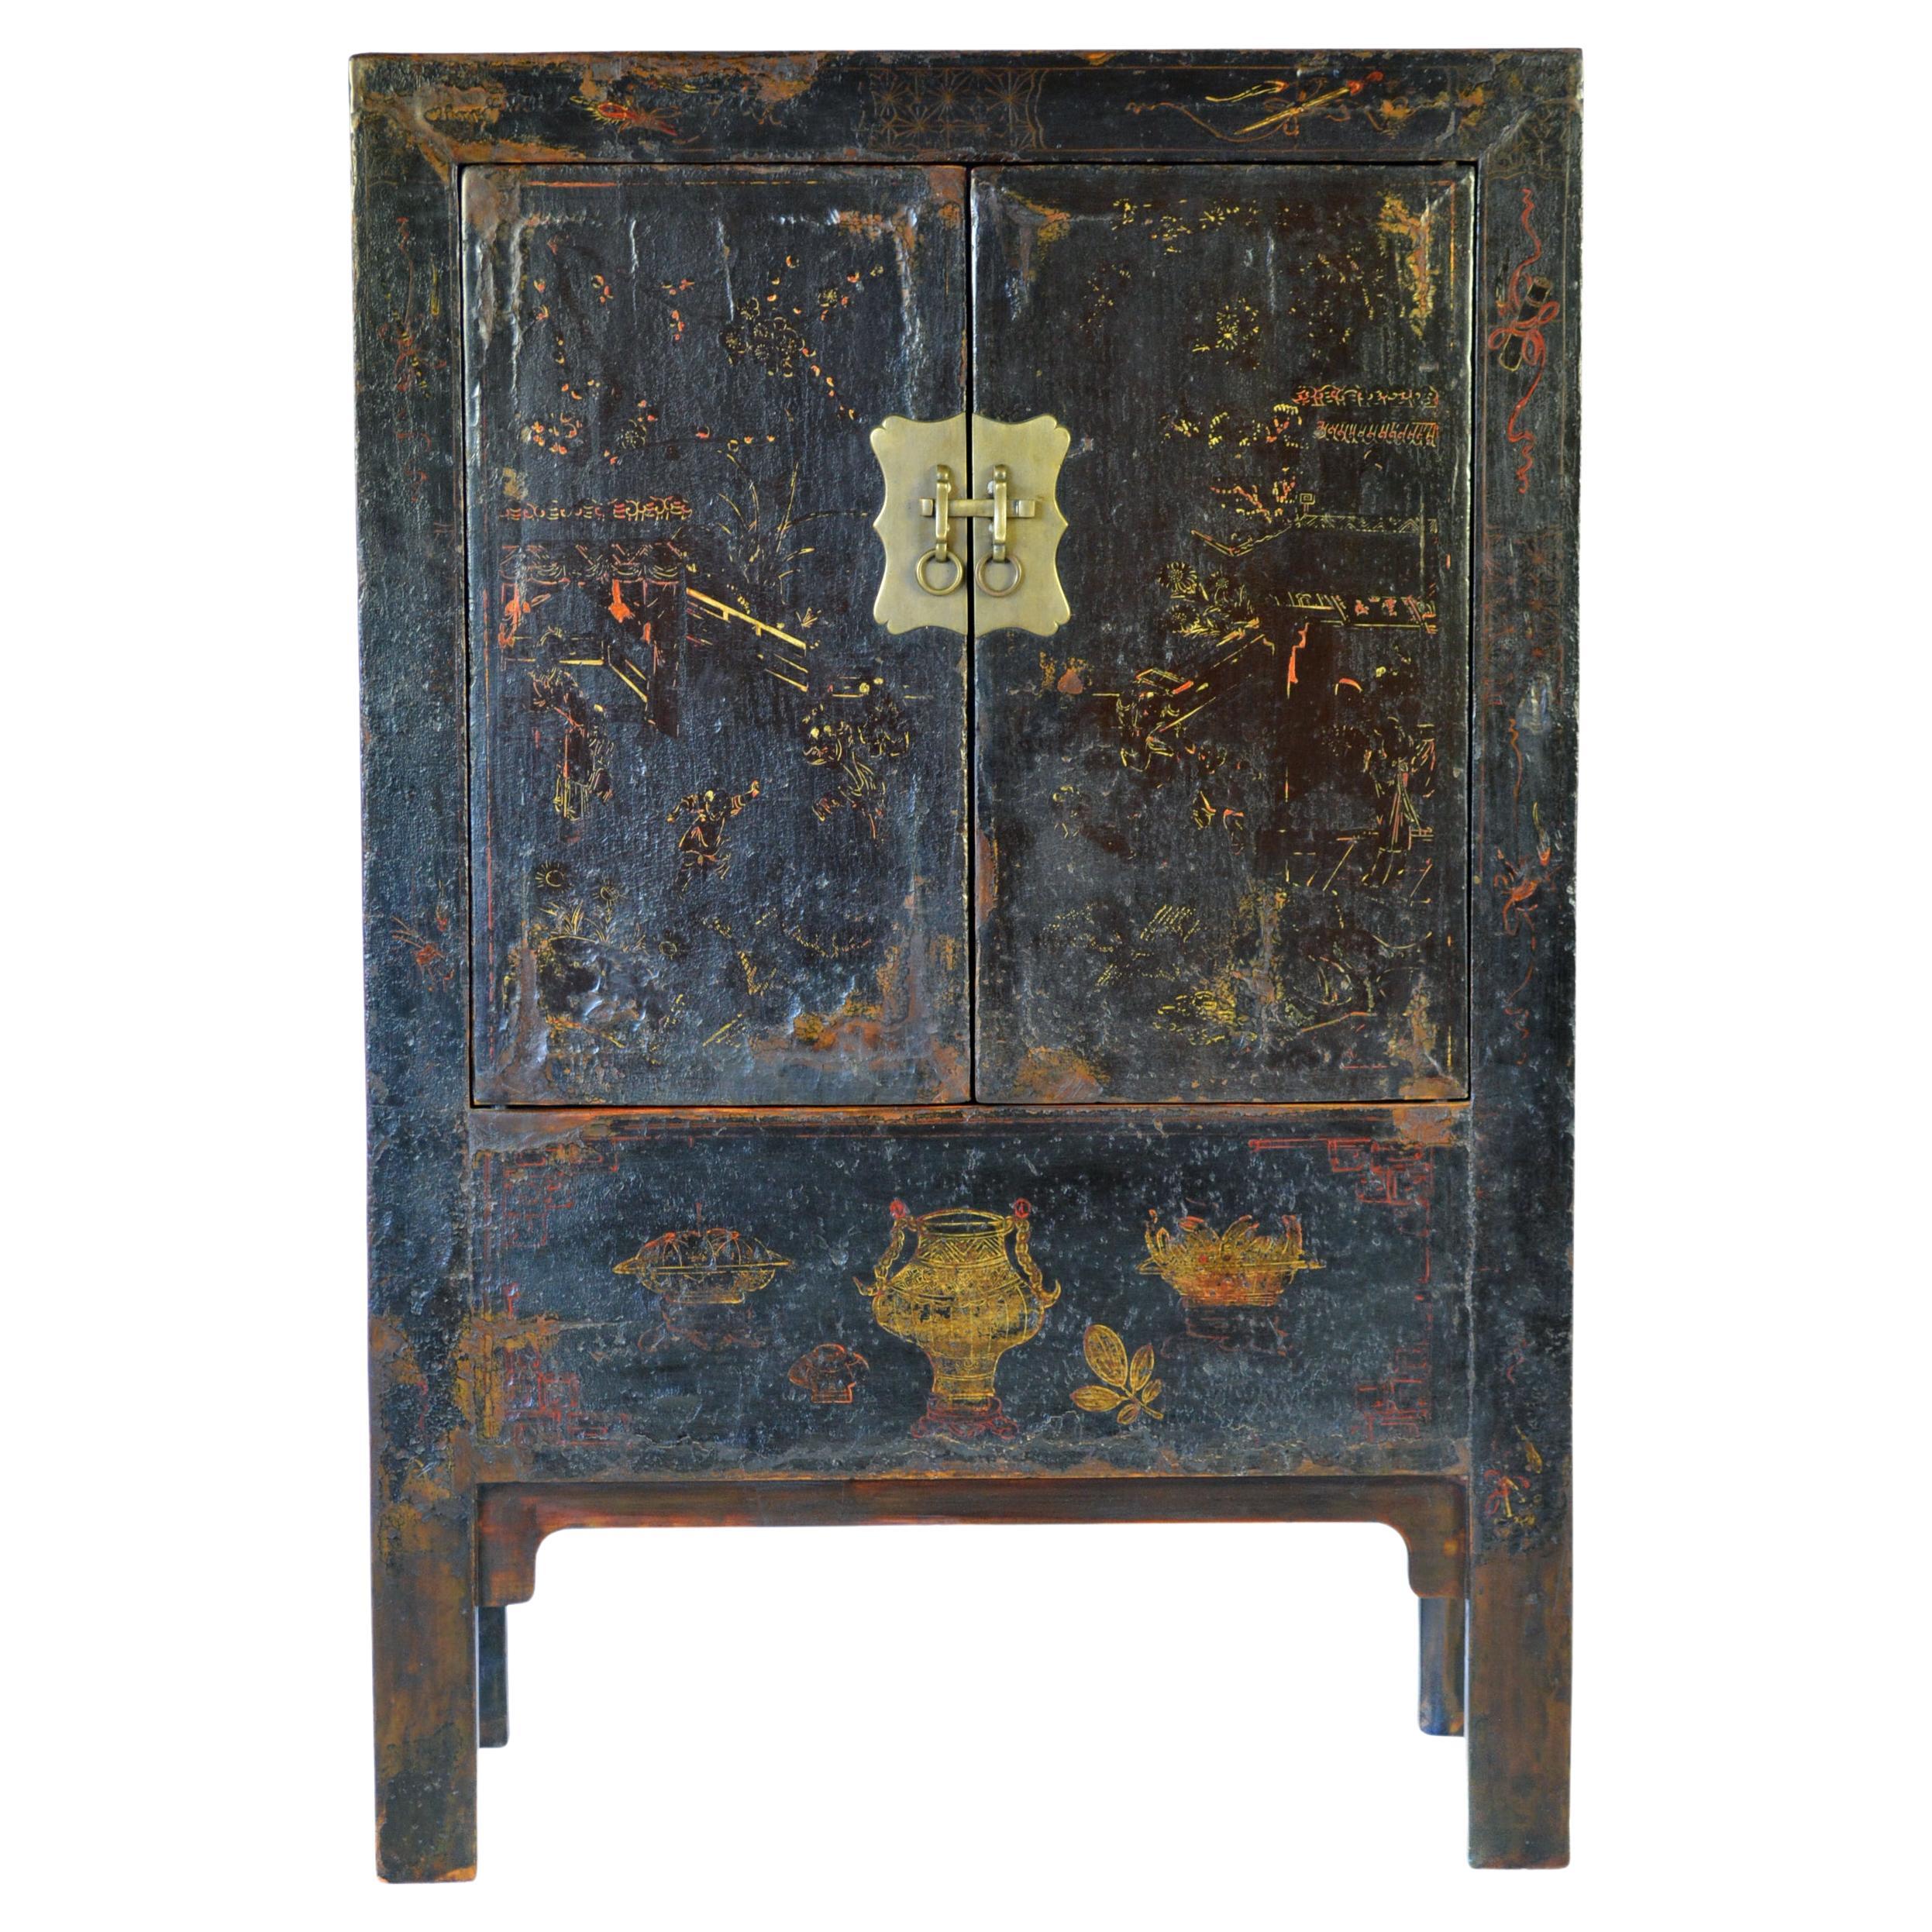 Early 19th Century Black Lacquer Cabinet